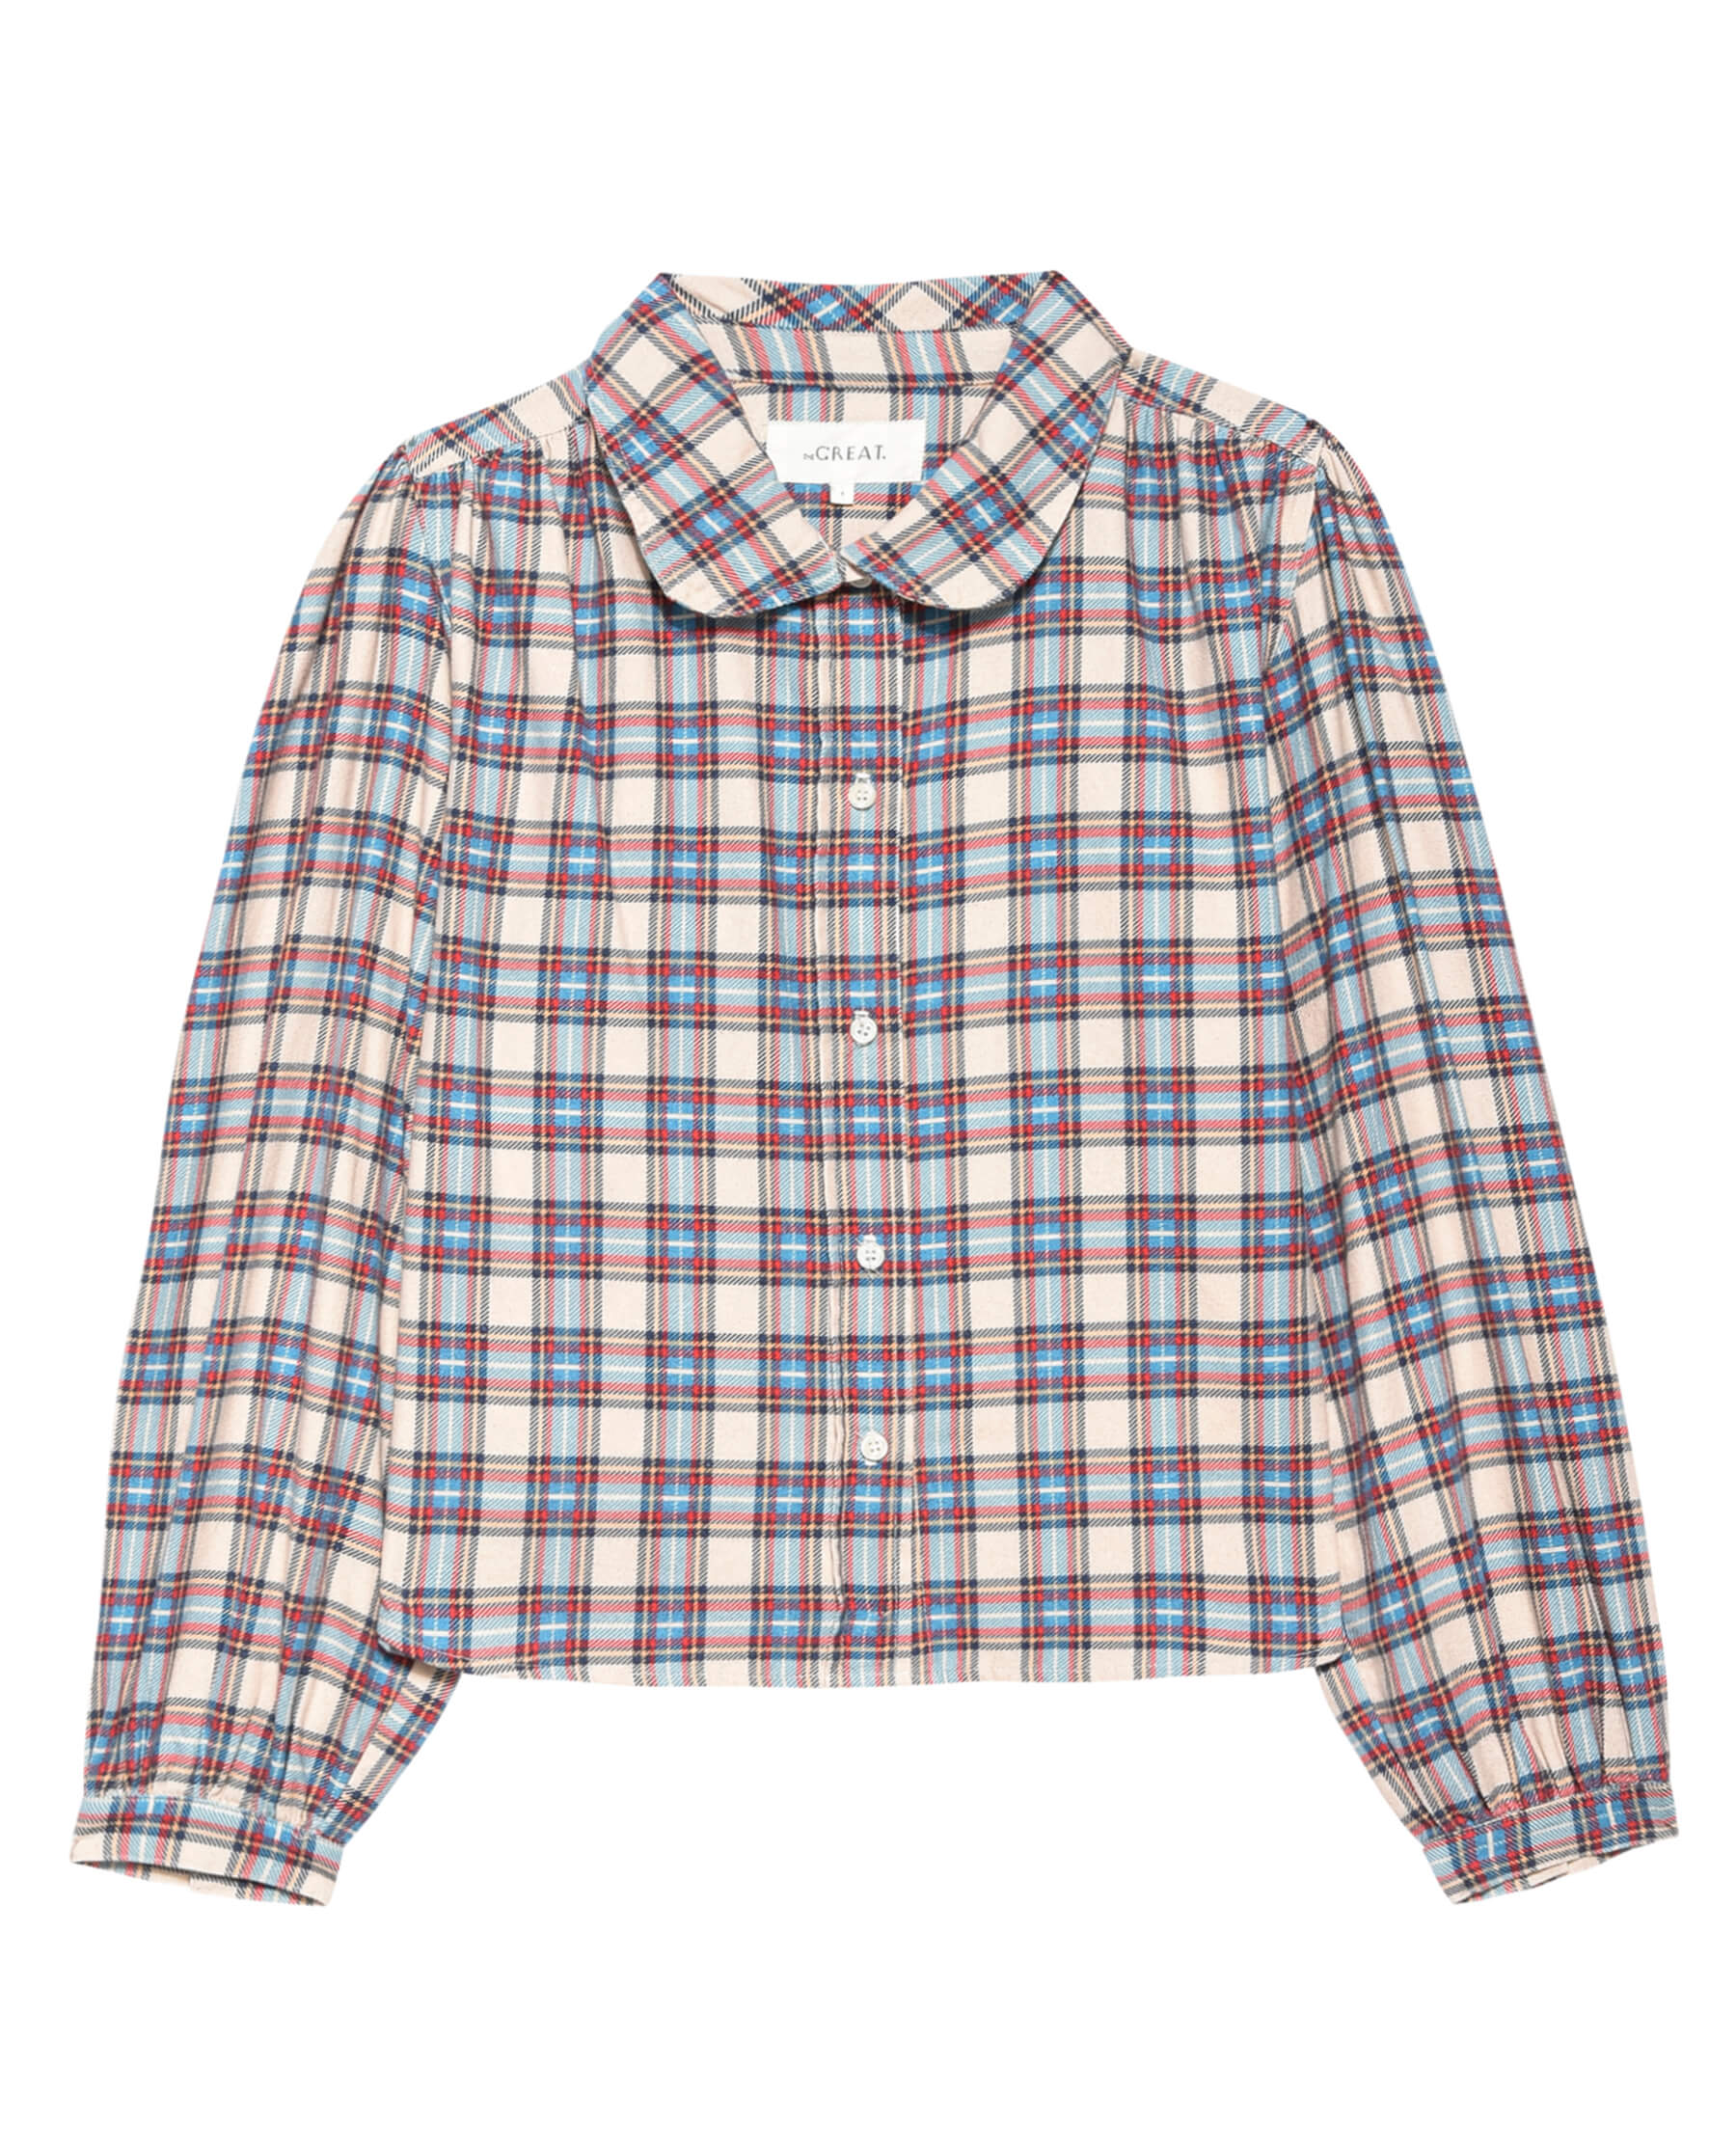 The Great Tableau Top in Market Plaid